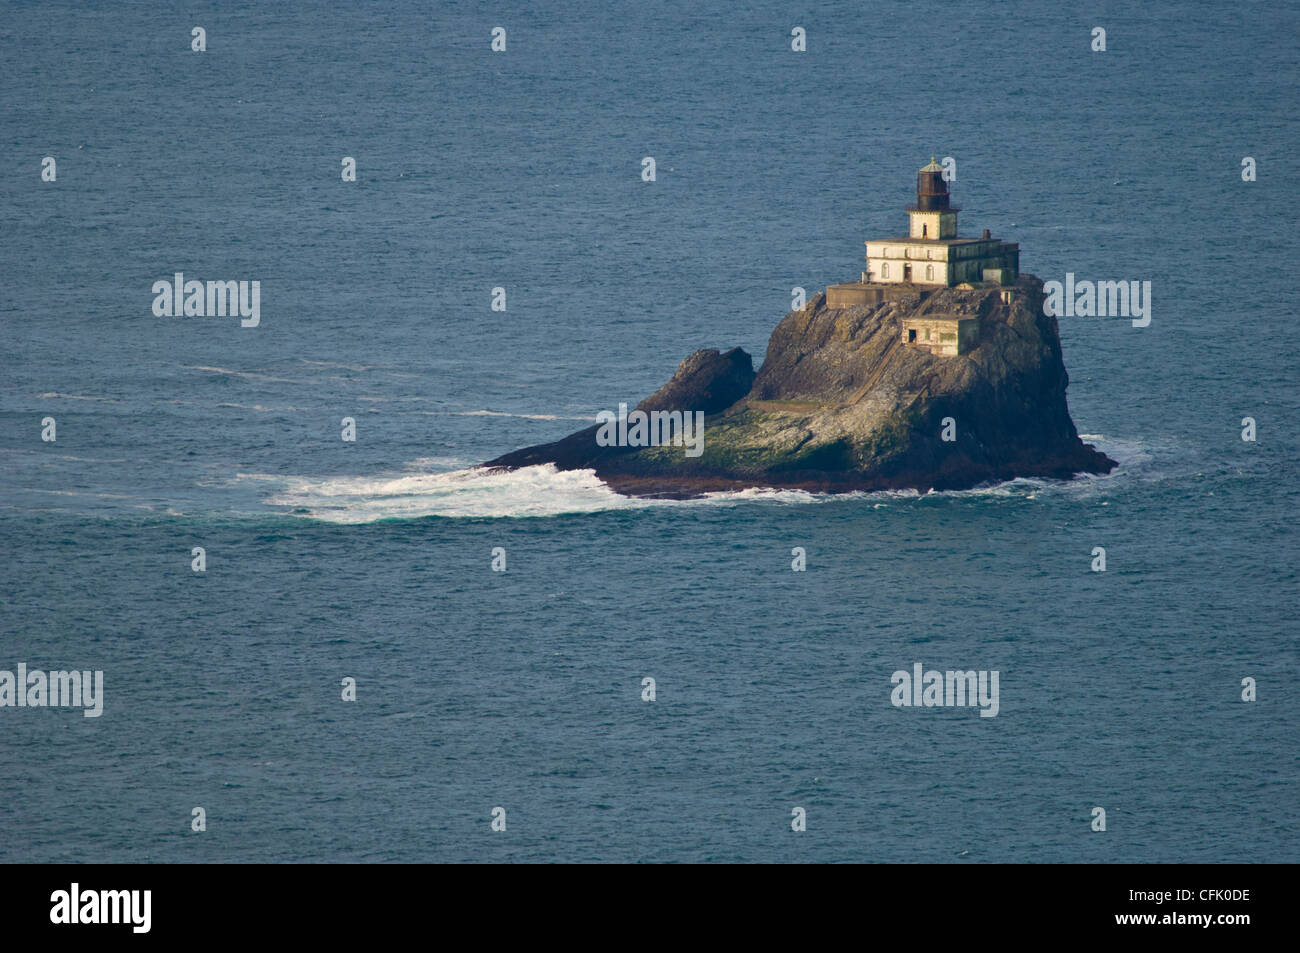 Tillamook Rock Lighthouse, also known as “Terrible Tilly”, first lit in 1881; Ecola State Park, northern Oregon coast. Stock Photo